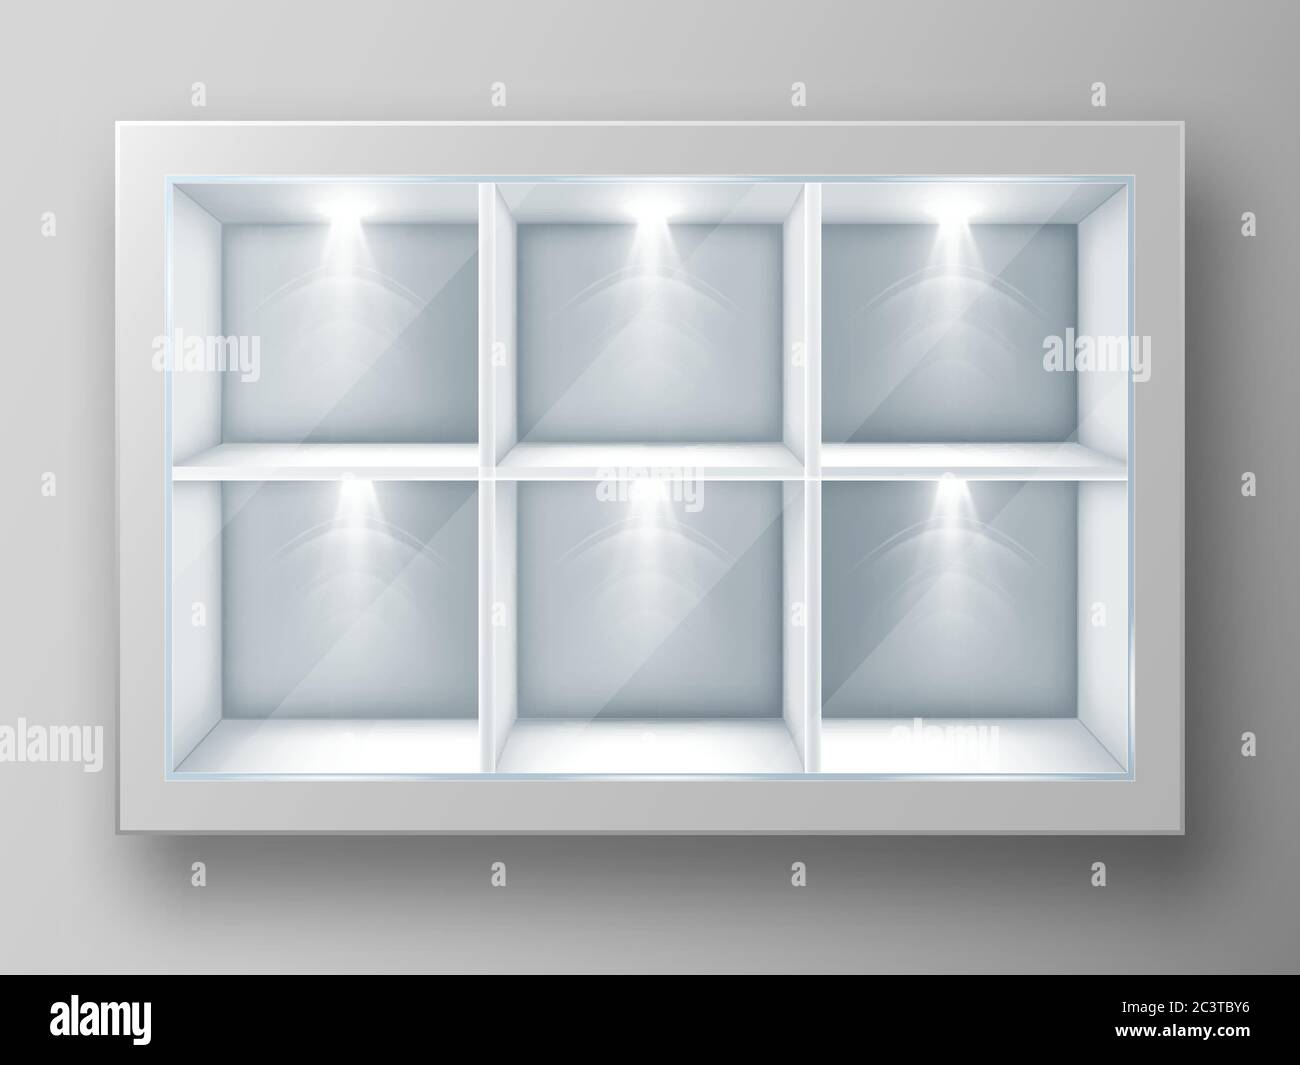 White showcase with square shelves in shop or gallery. Vector realistic mockup of empty glass display stand or bookshelf illuminated by spotlights for advertising or museum exhibition Stock Vector